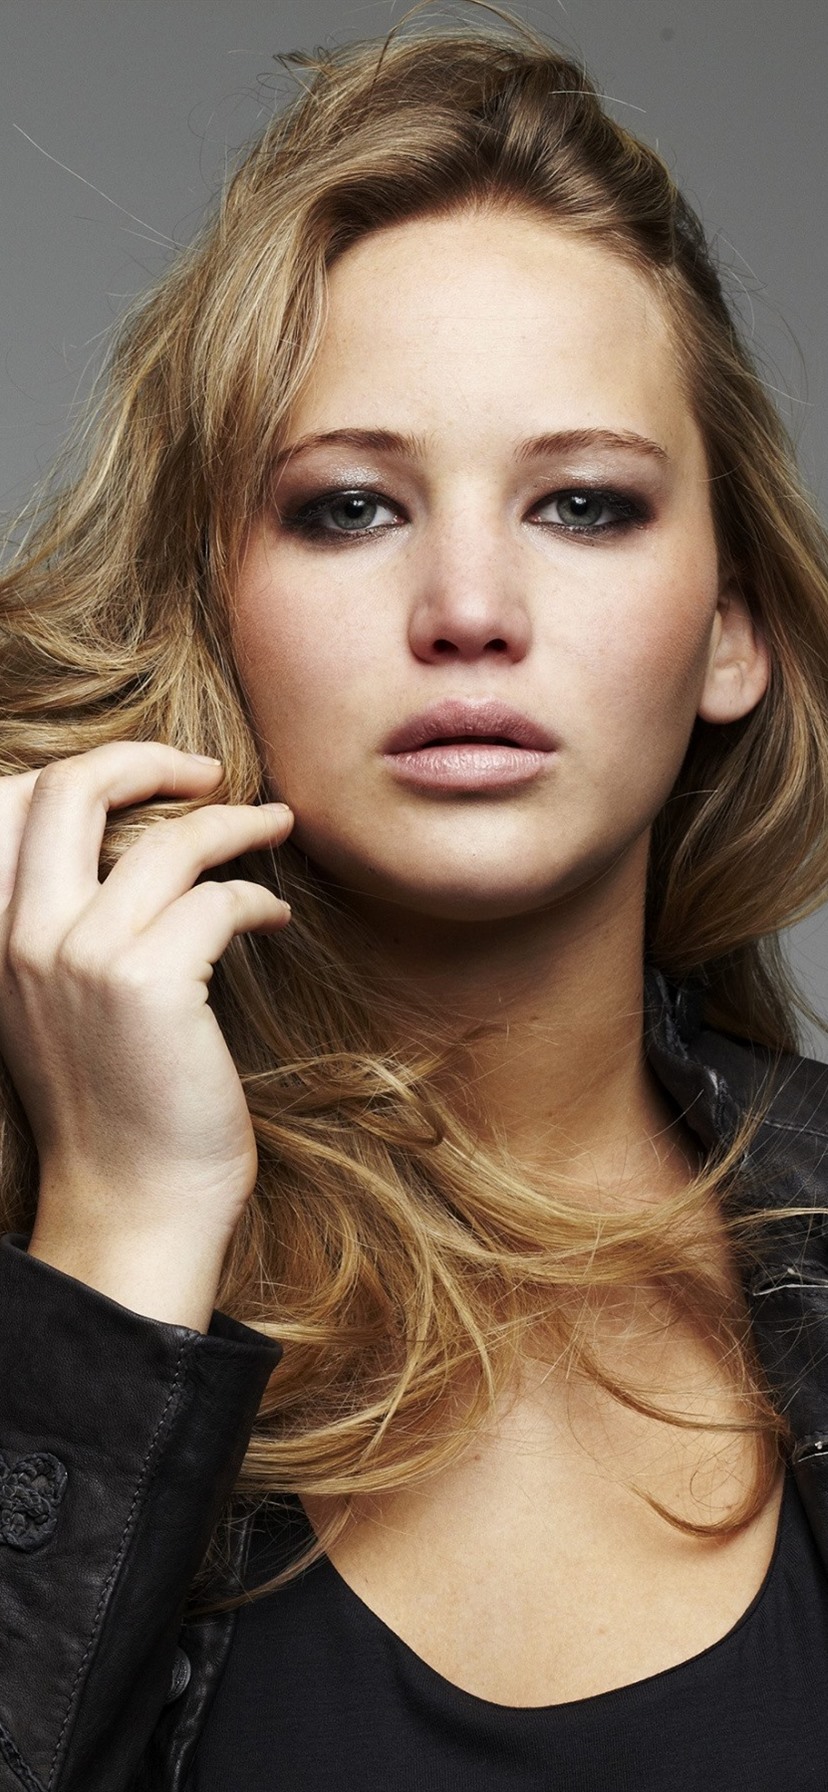 Jennifer Lawrence 24 828x1792 IPhone 11 XR Wallpaper, Background, Picture, Image